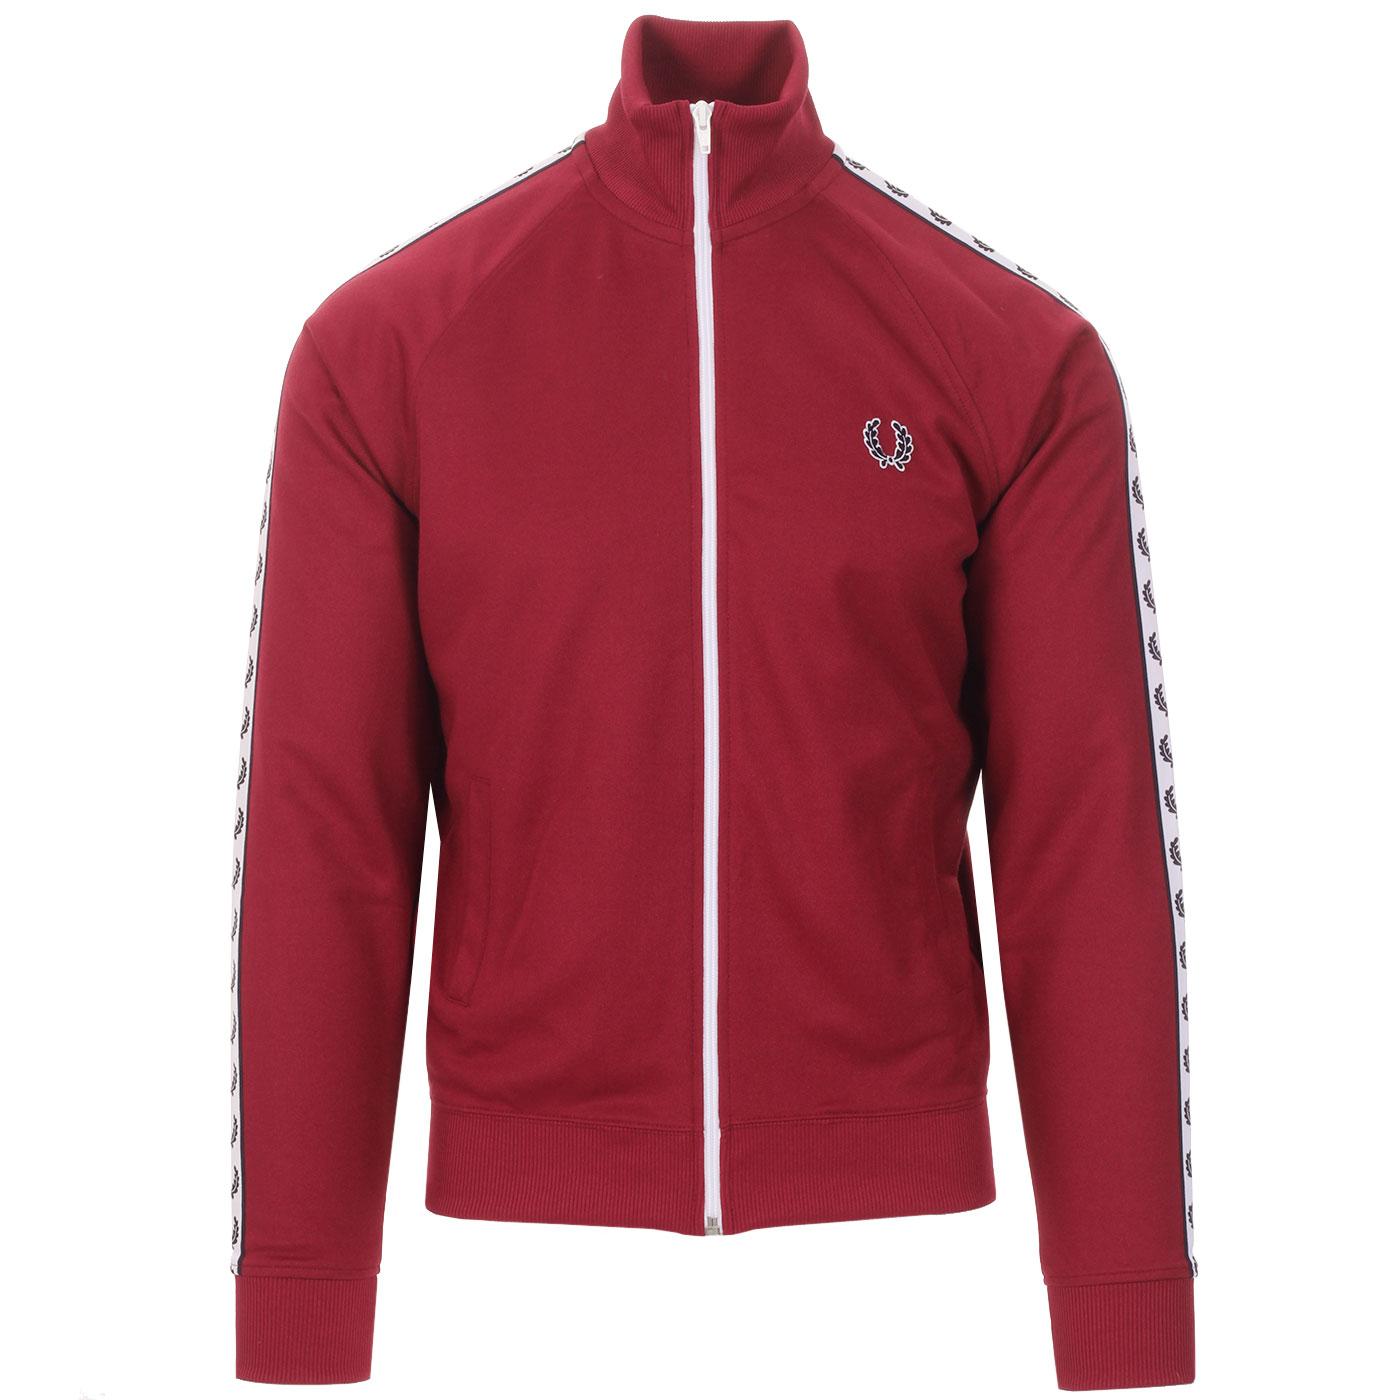 FRED PERRY Men's Laurel Wreath Tape Track Jacket M